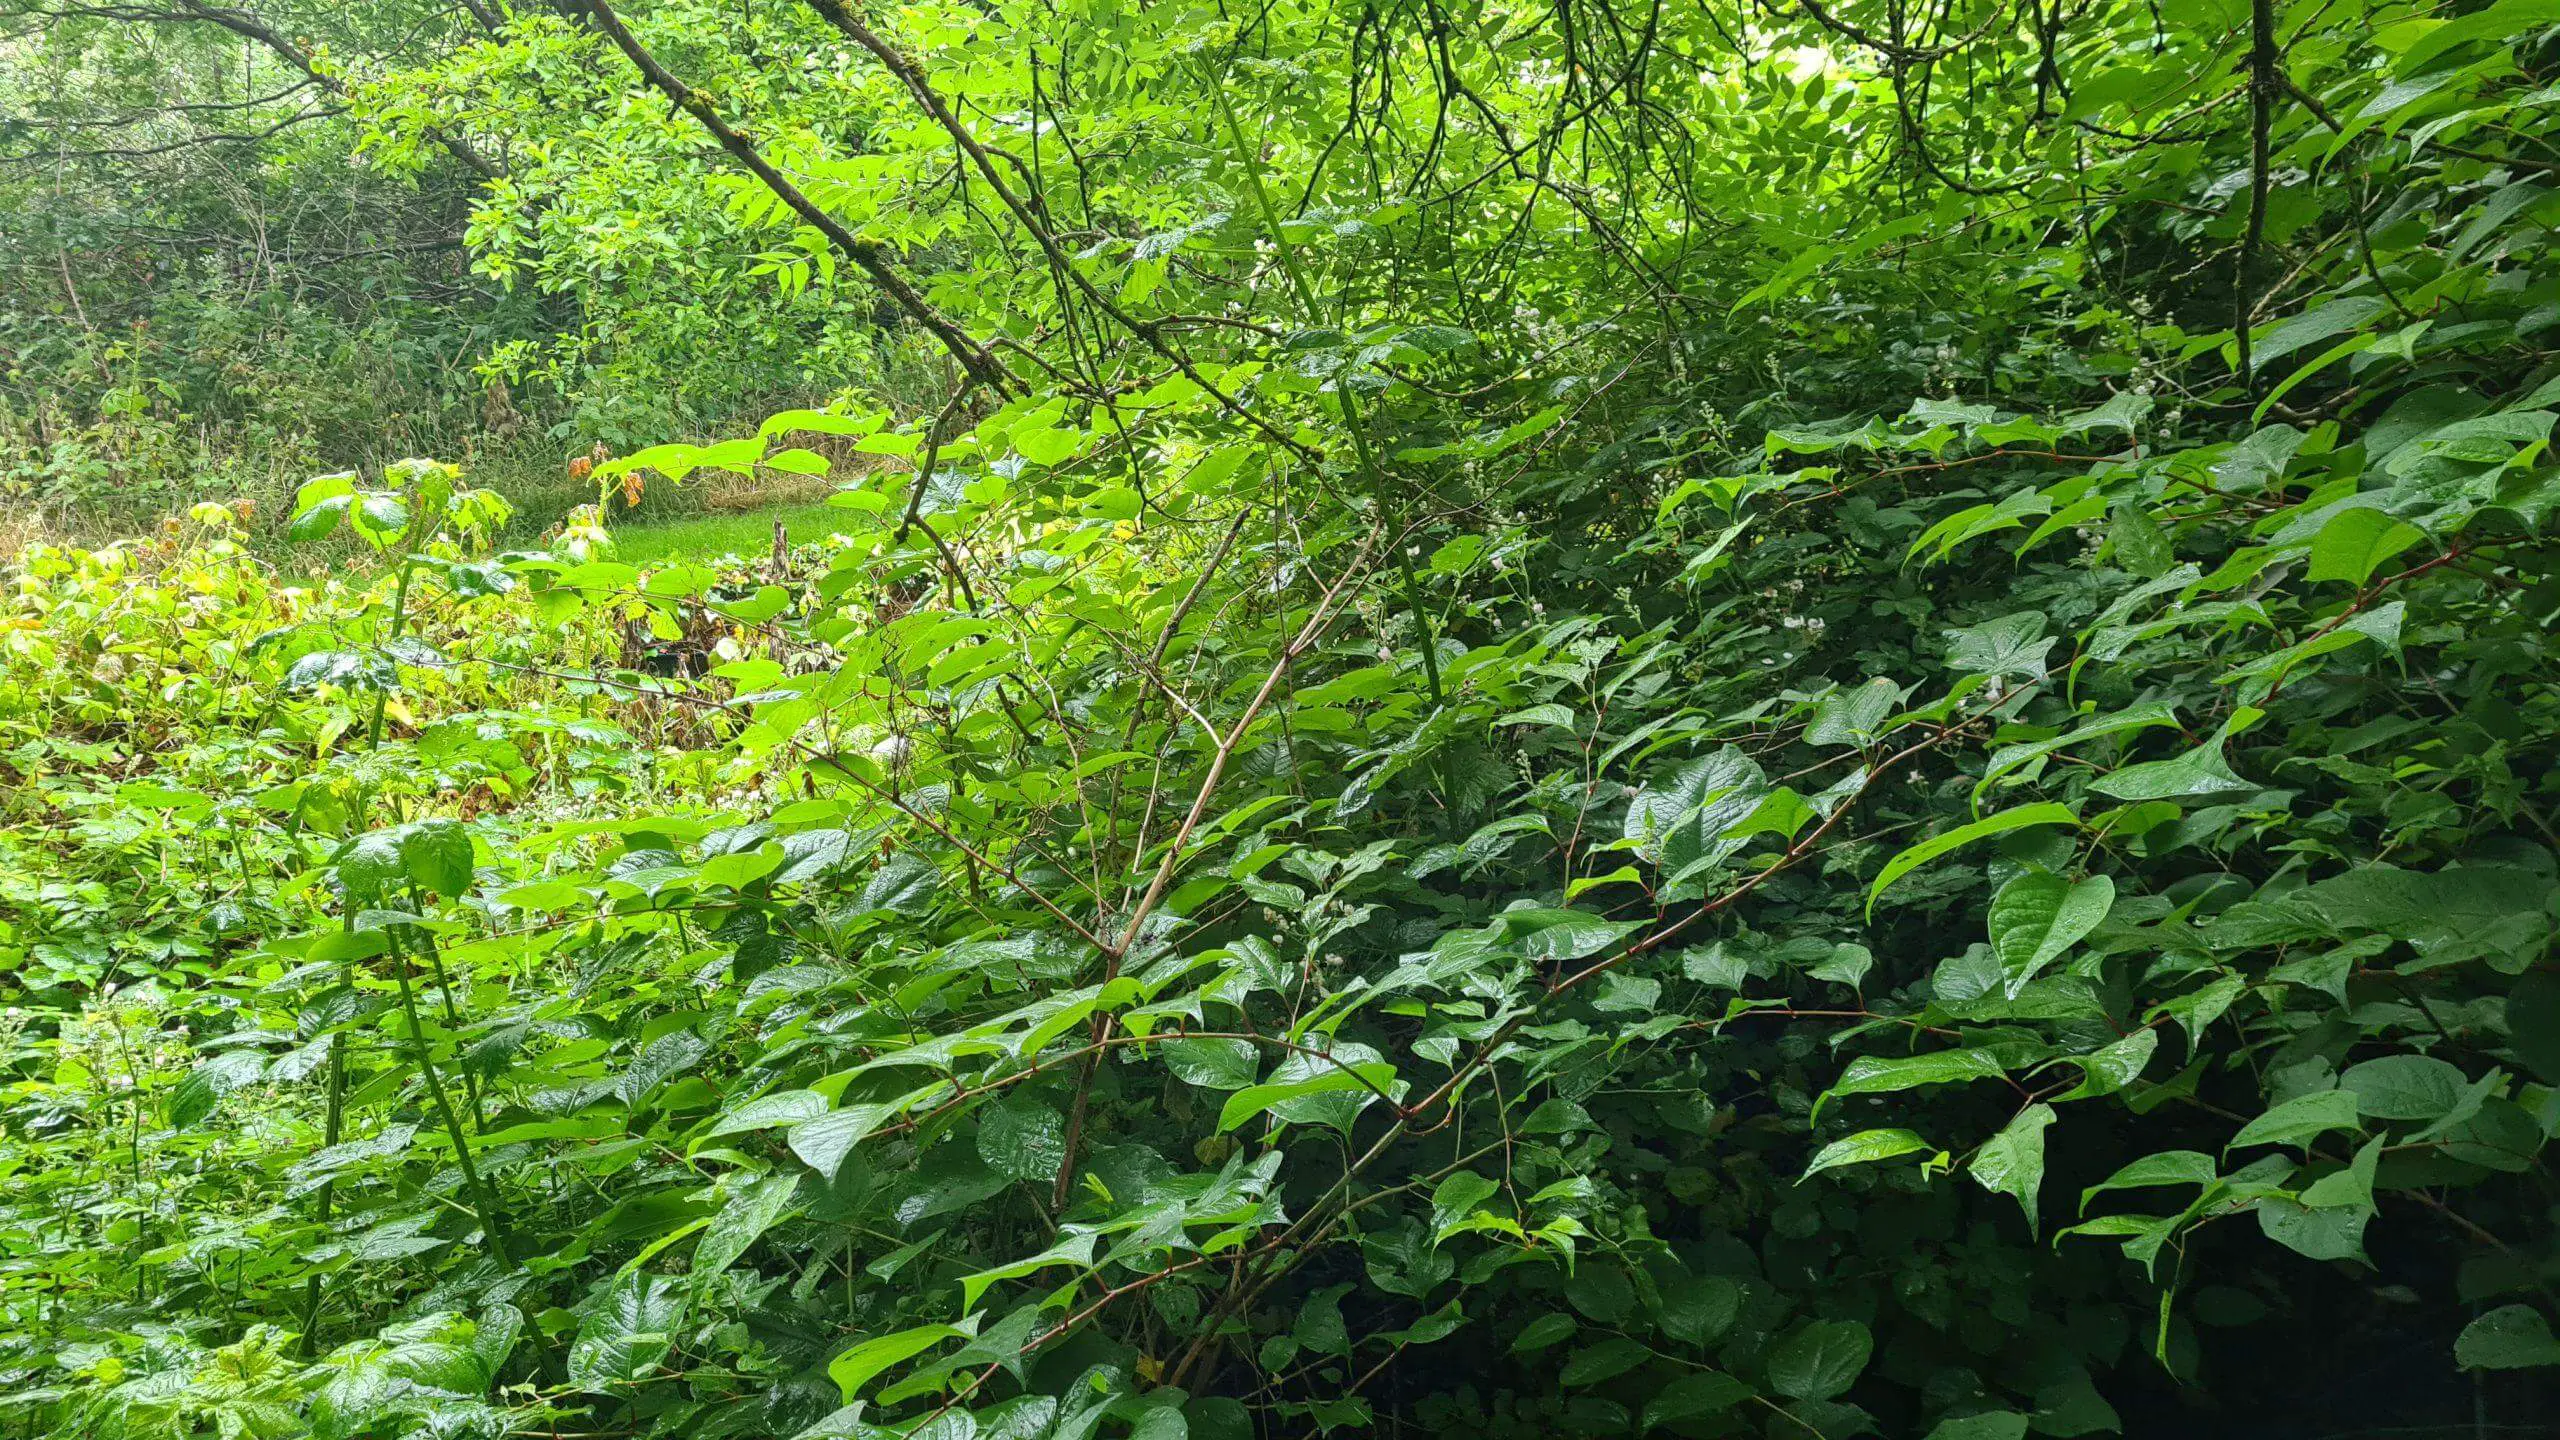 Climate change has had a significant effect on the growth of invasive weeds